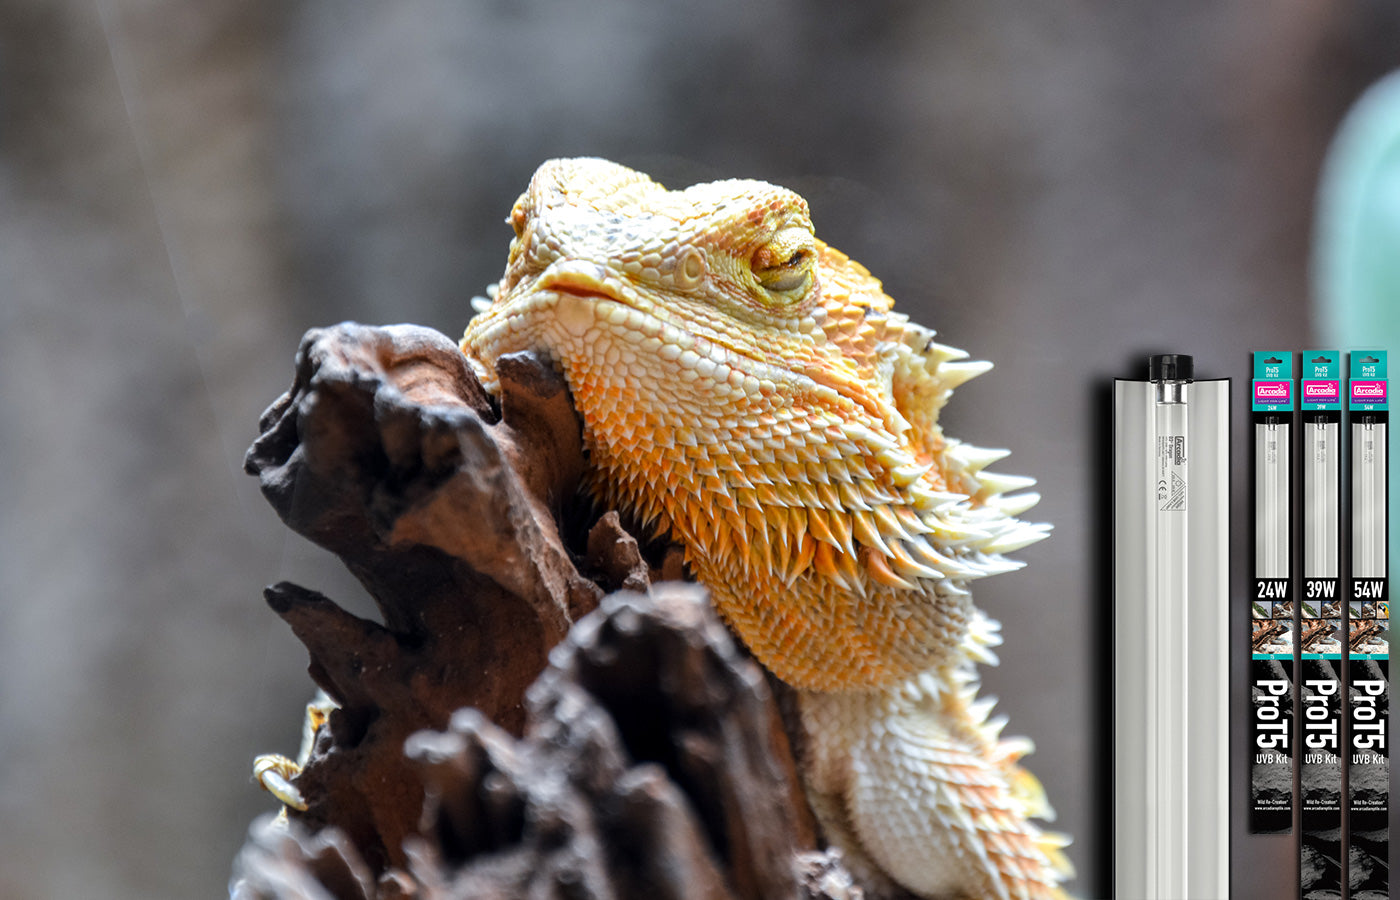 Which UV Light Should I Buy for My Bearded Dragon?